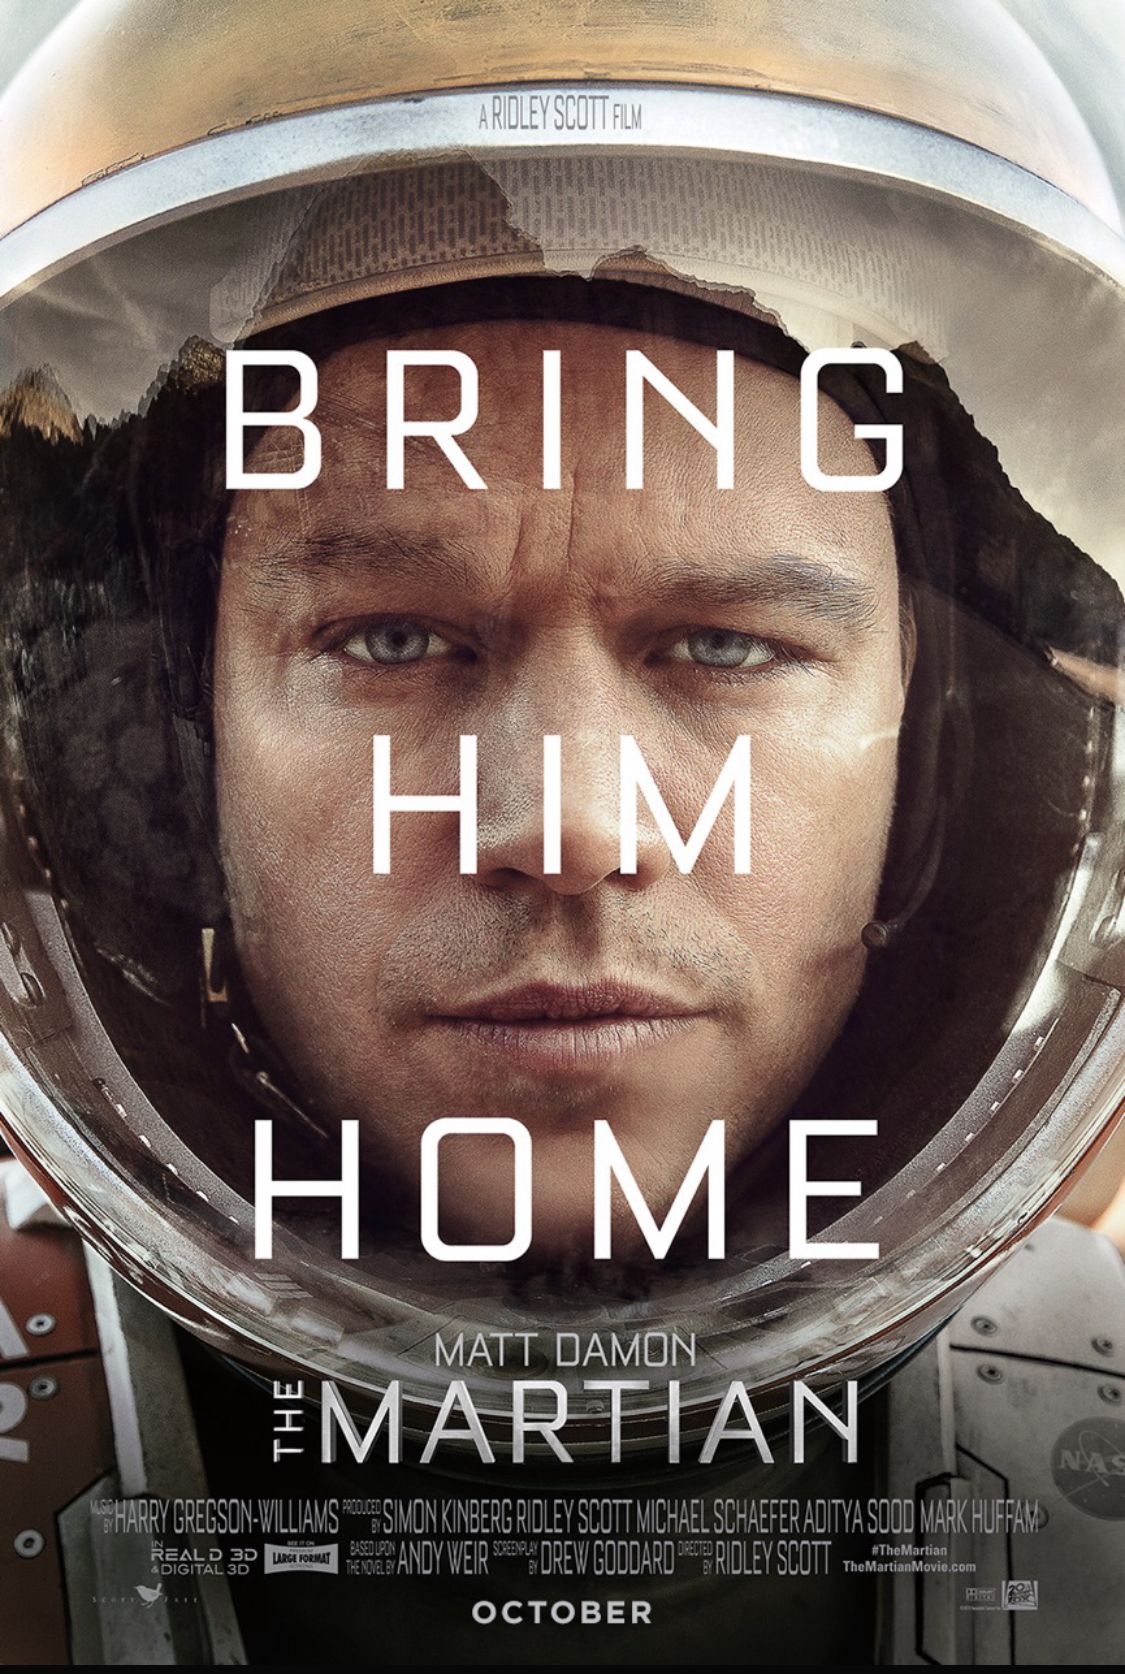 The Martian — Film Poster